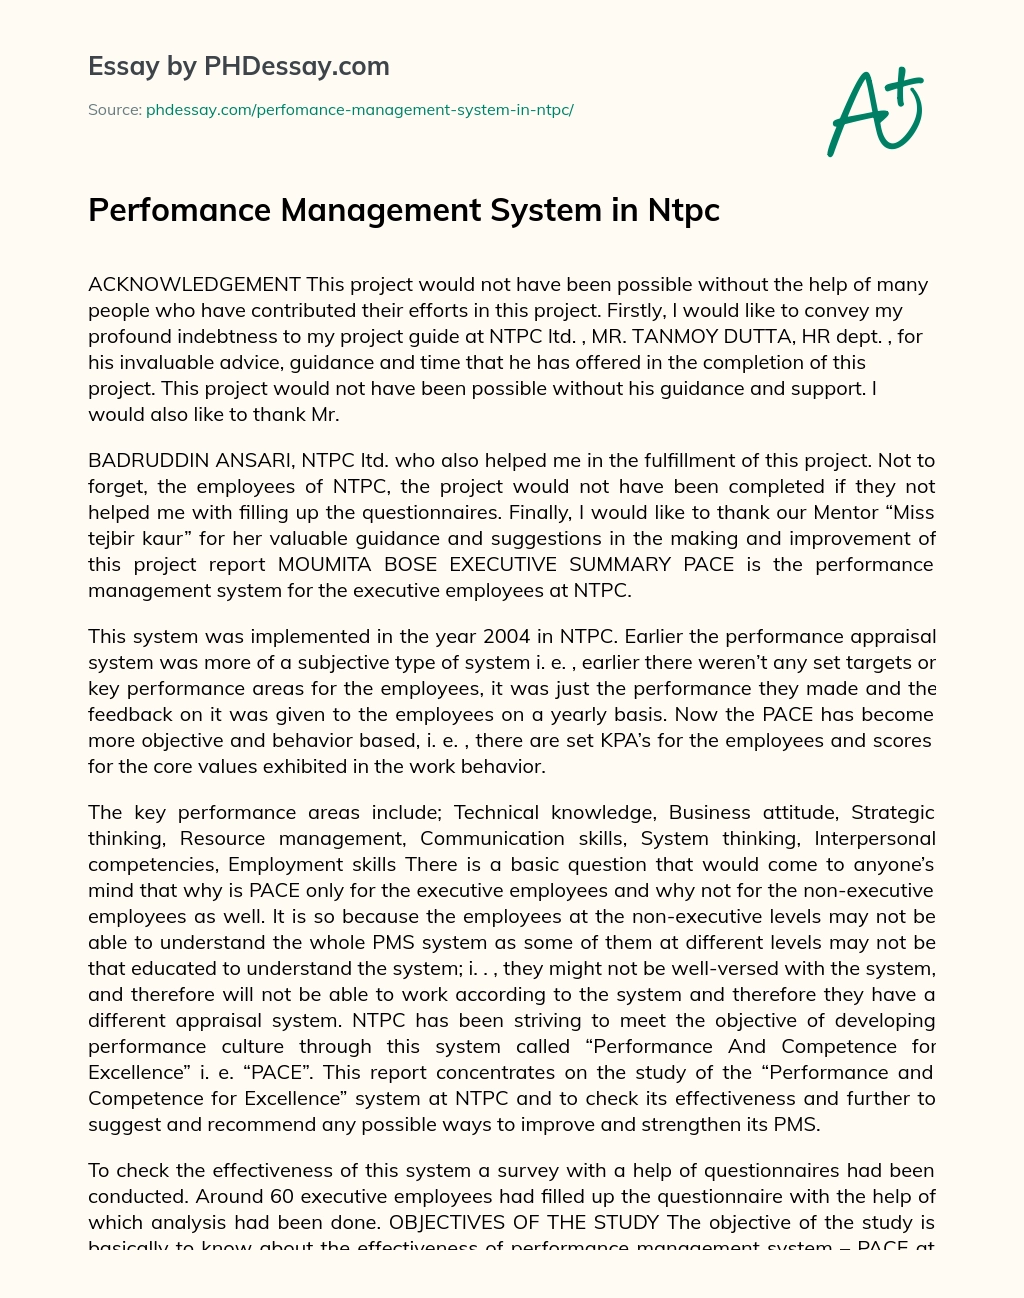 Perfomance Management System in Ntpc essay